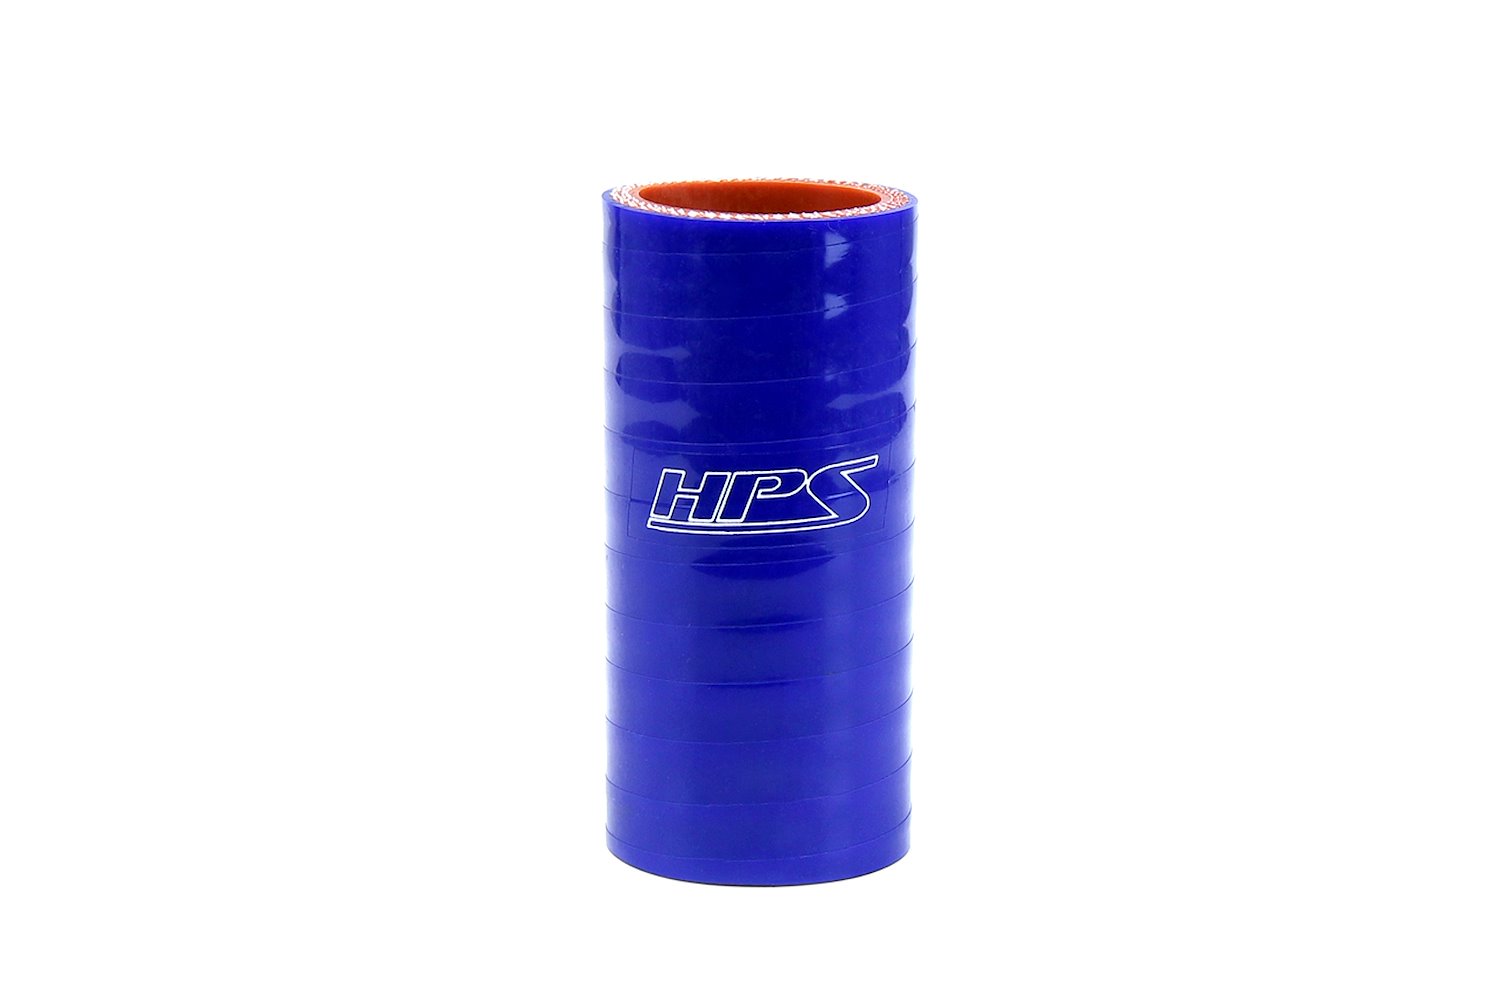 HTSC-138-L6-BLUE Silicone Coupler Hose, High-Temp 4-Ply Reinforced, 1-3/8 in. ID, 6 in. Long, Blue